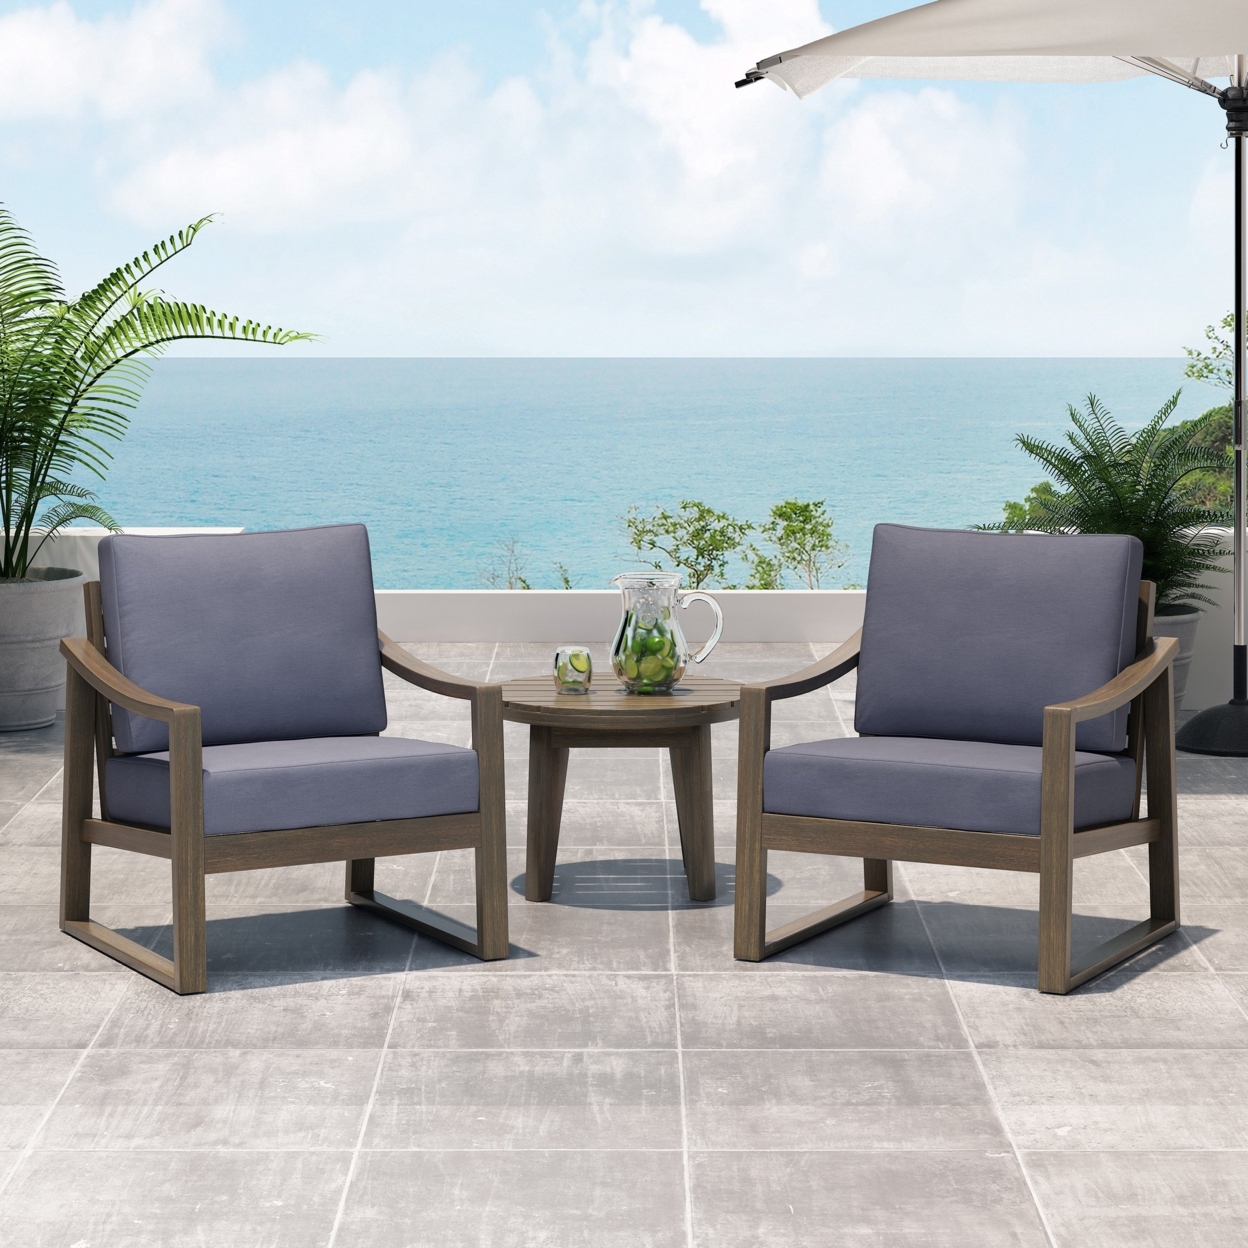 Johnlucas Outdoor Acacia Wood Club Chairs With Water Resistant Cushions (Set Of 2) - Gray/dark Gray